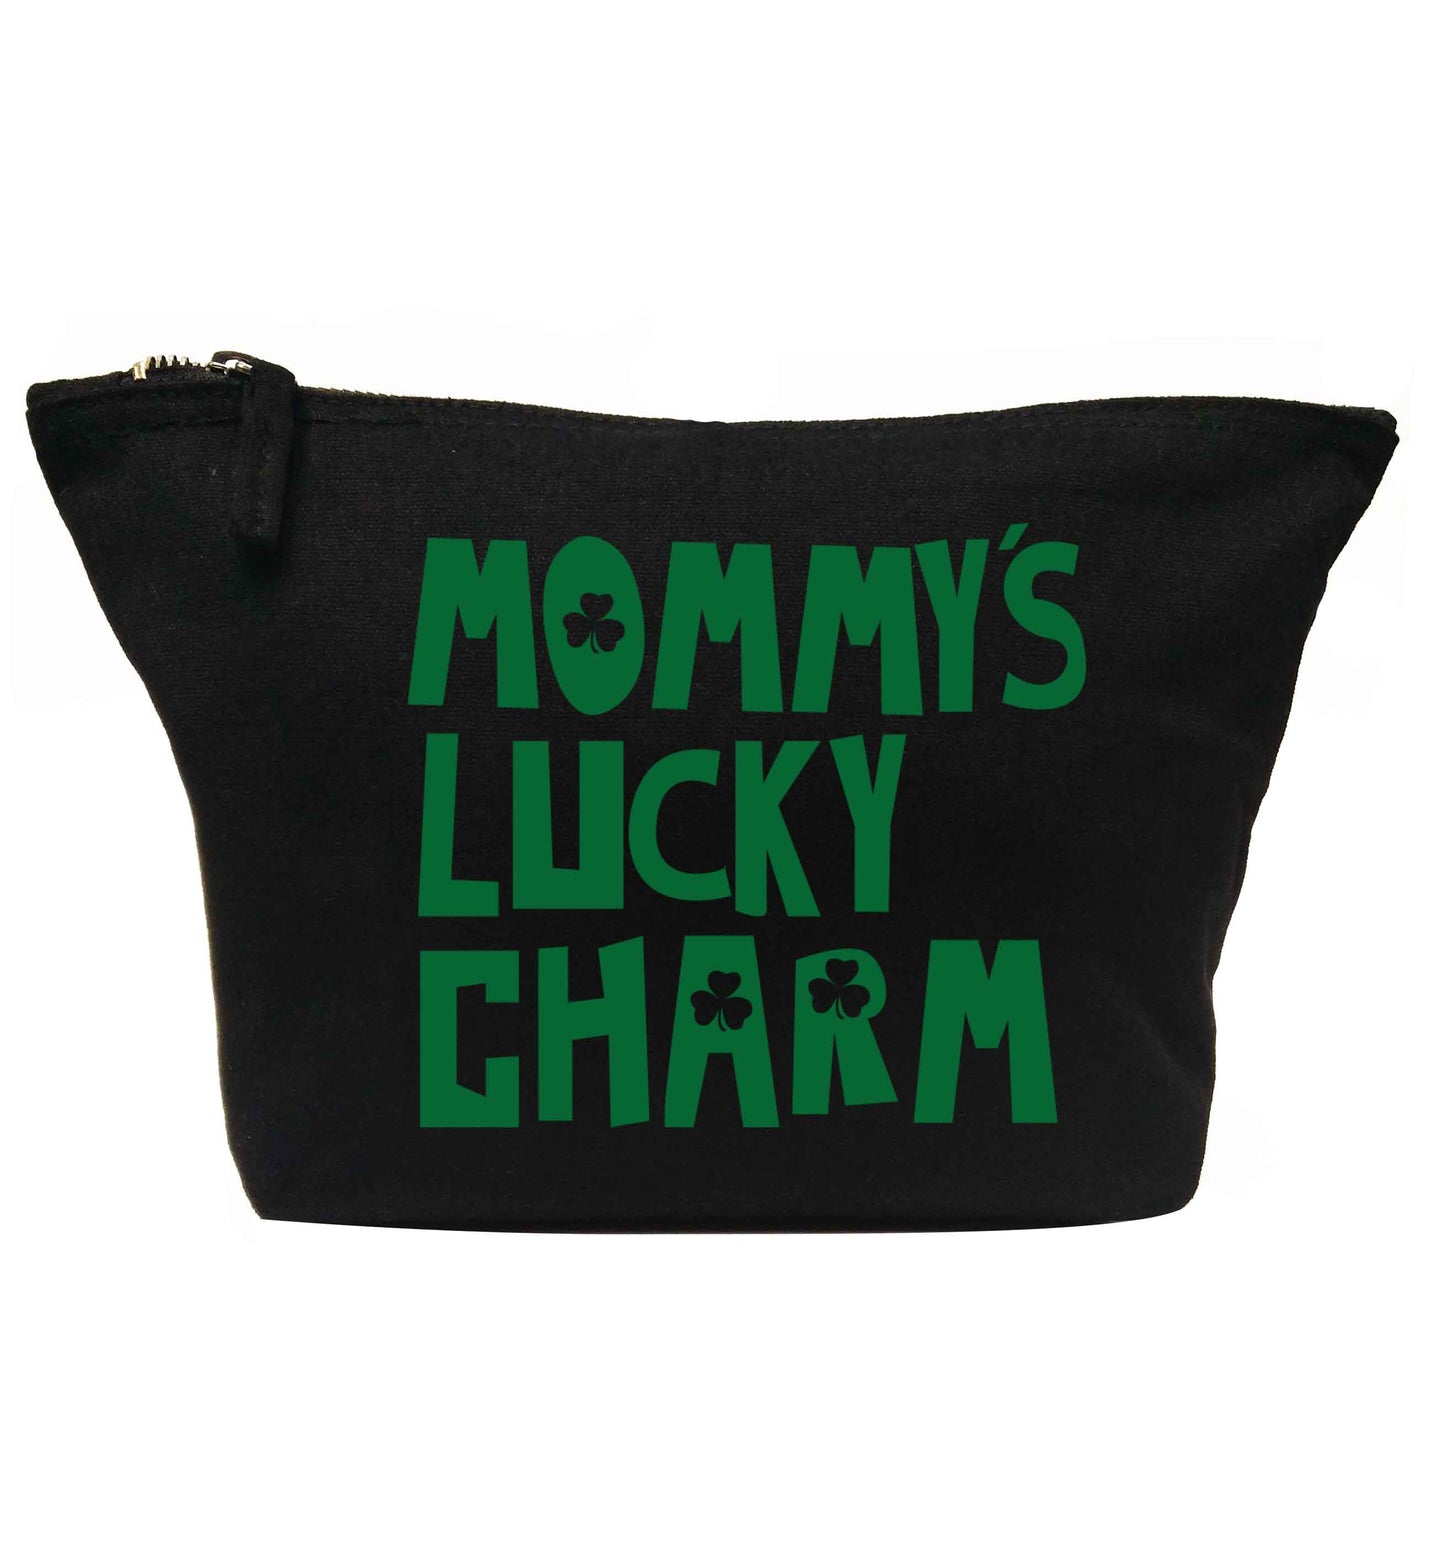 Mommy's lucky charm | Makeup / wash bag